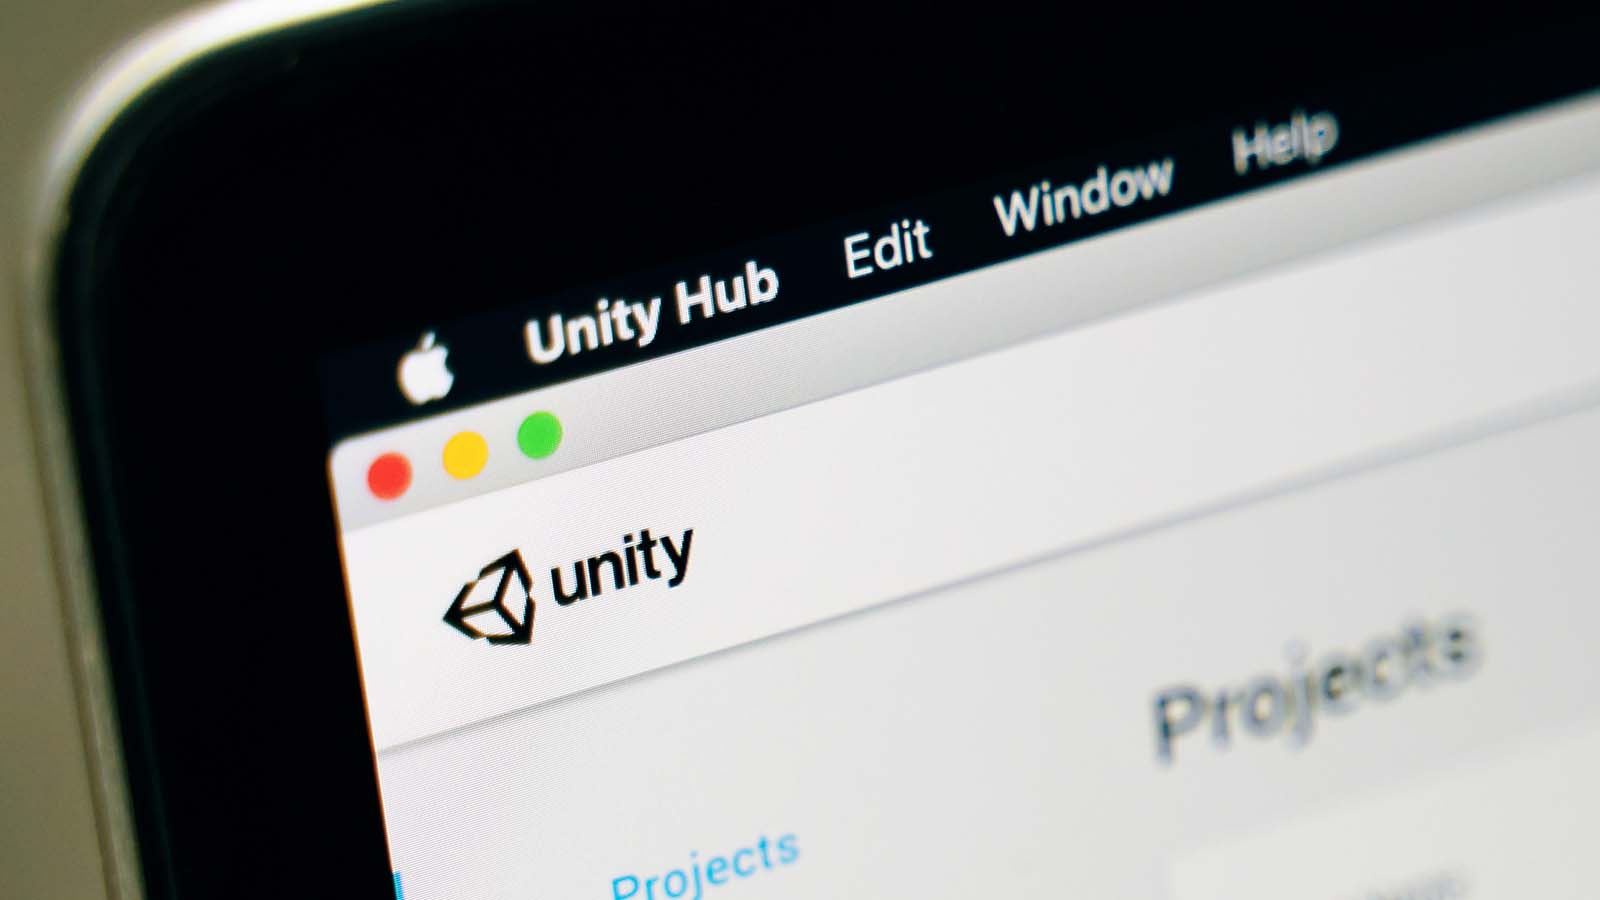 The Unity Software website is displayed on a laptop screen.